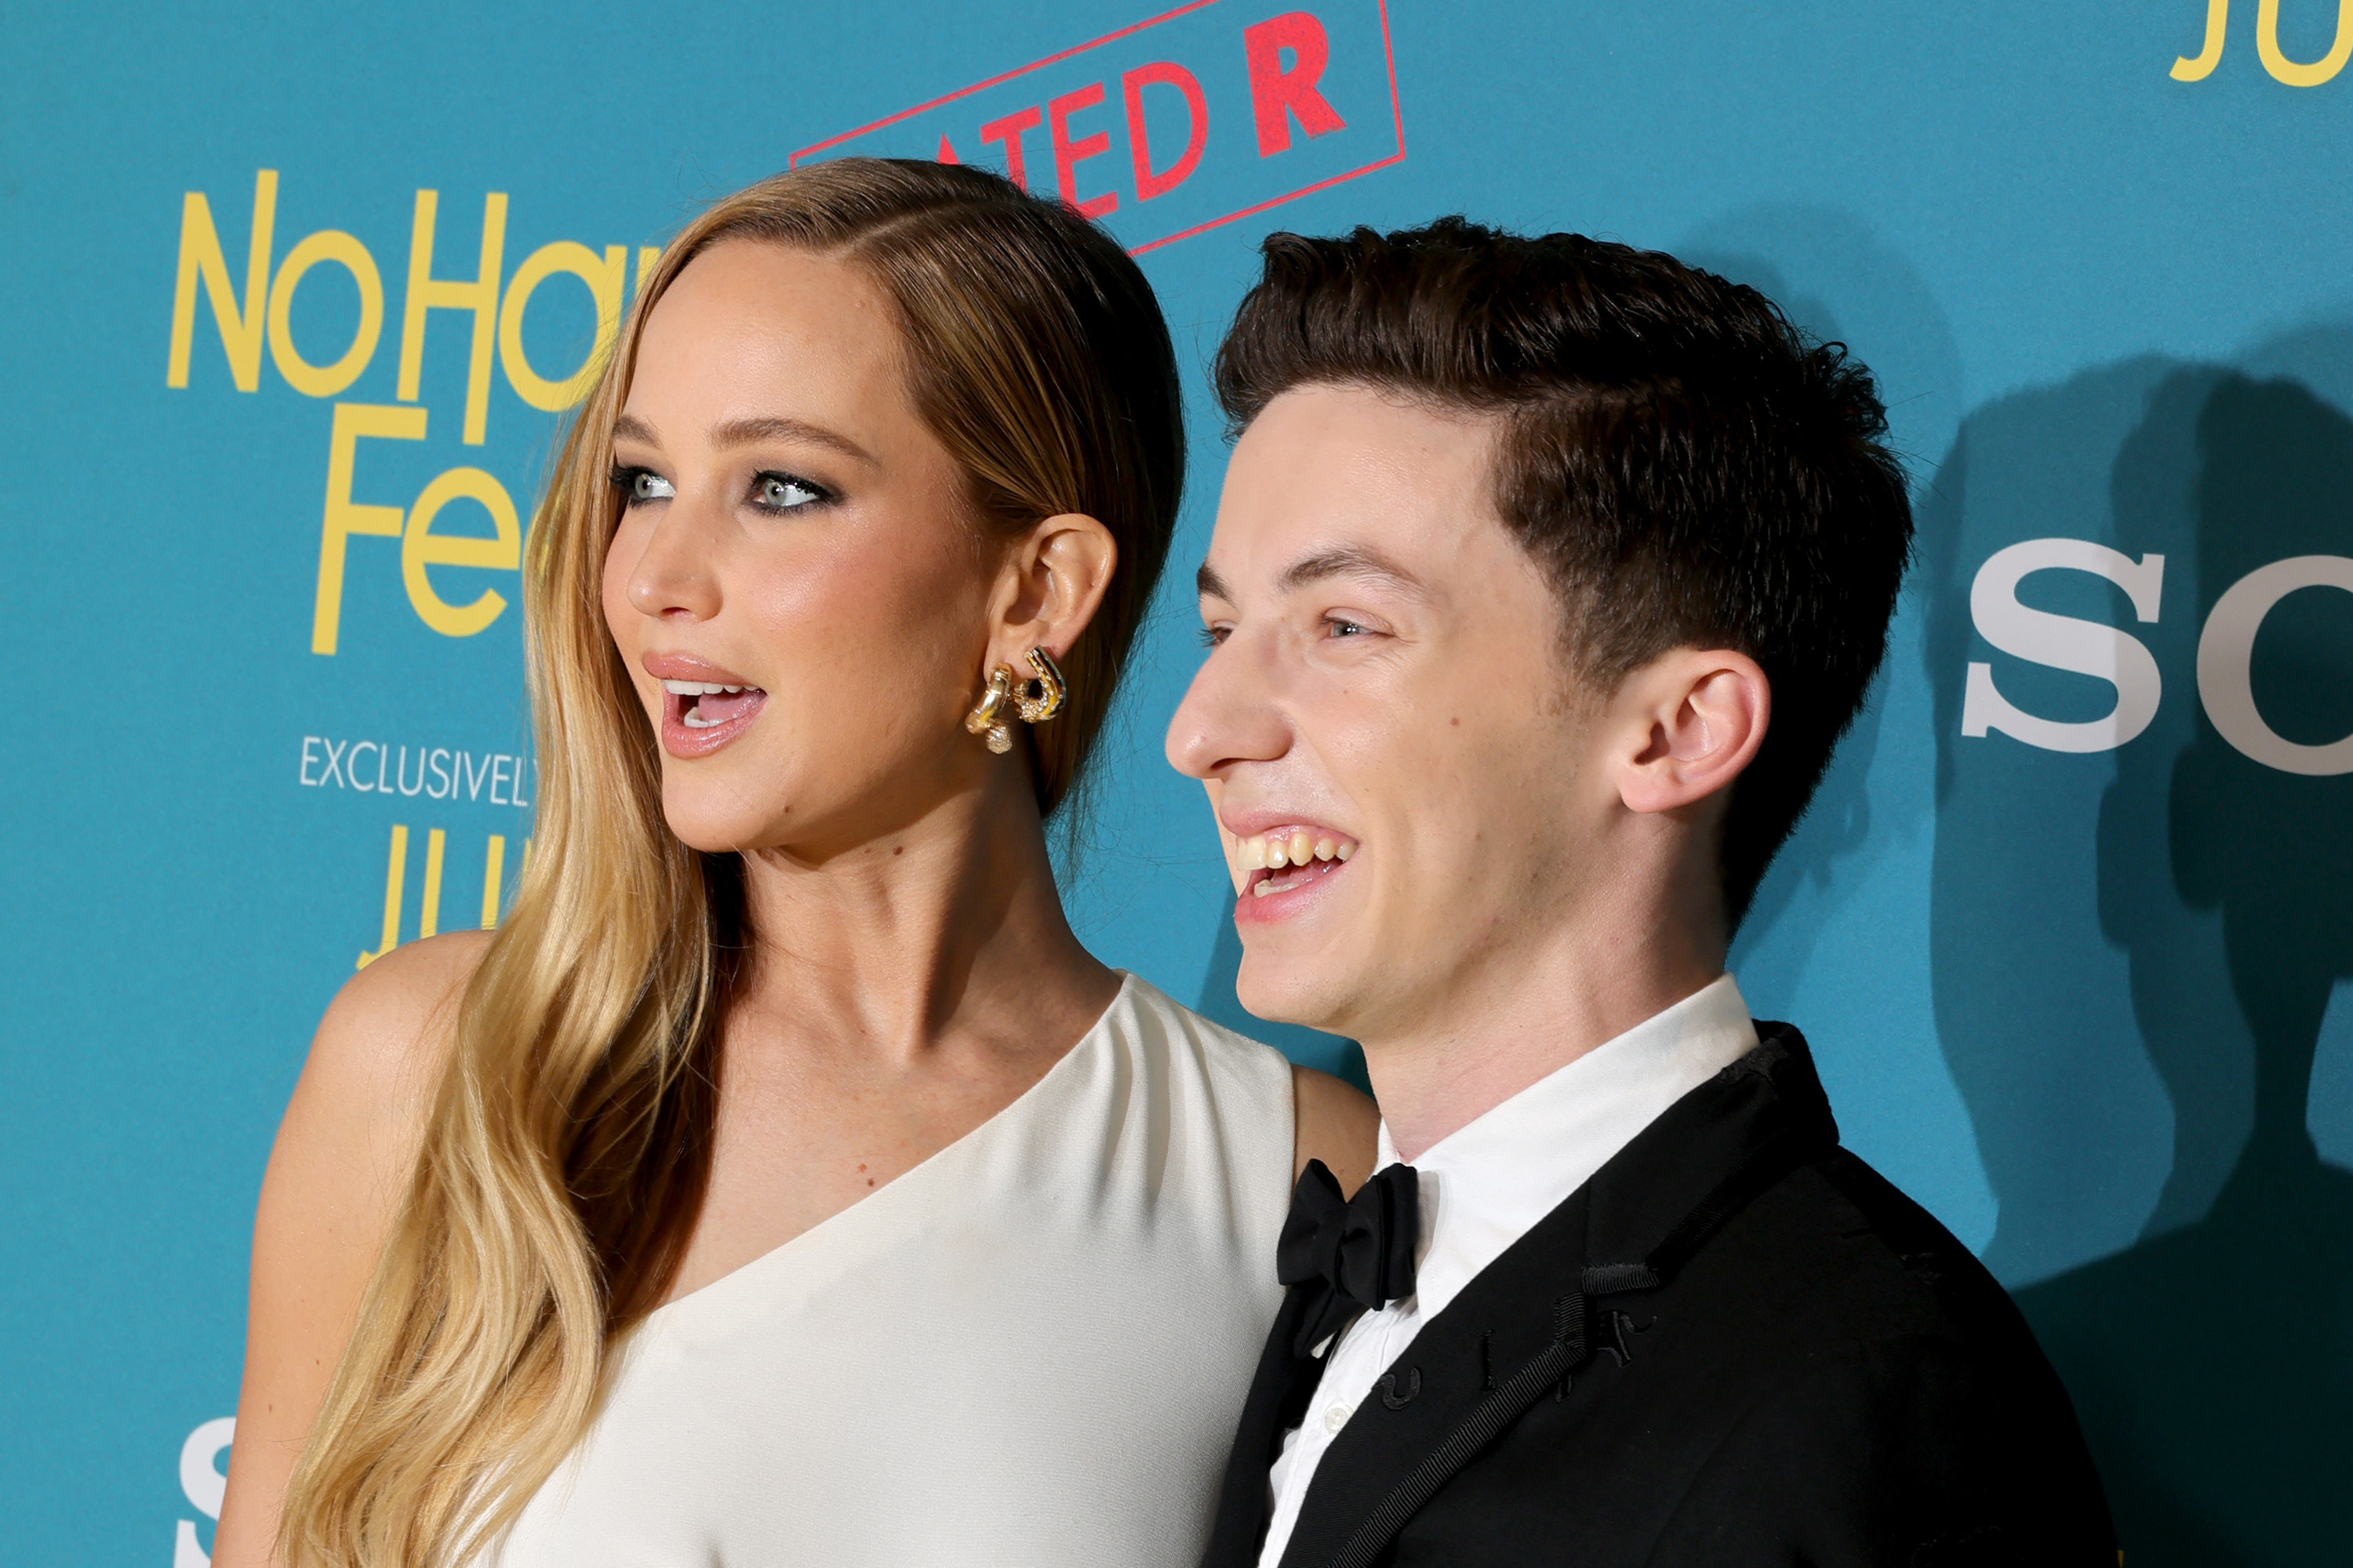 Close-up of Jennifer and Andrew at a media event